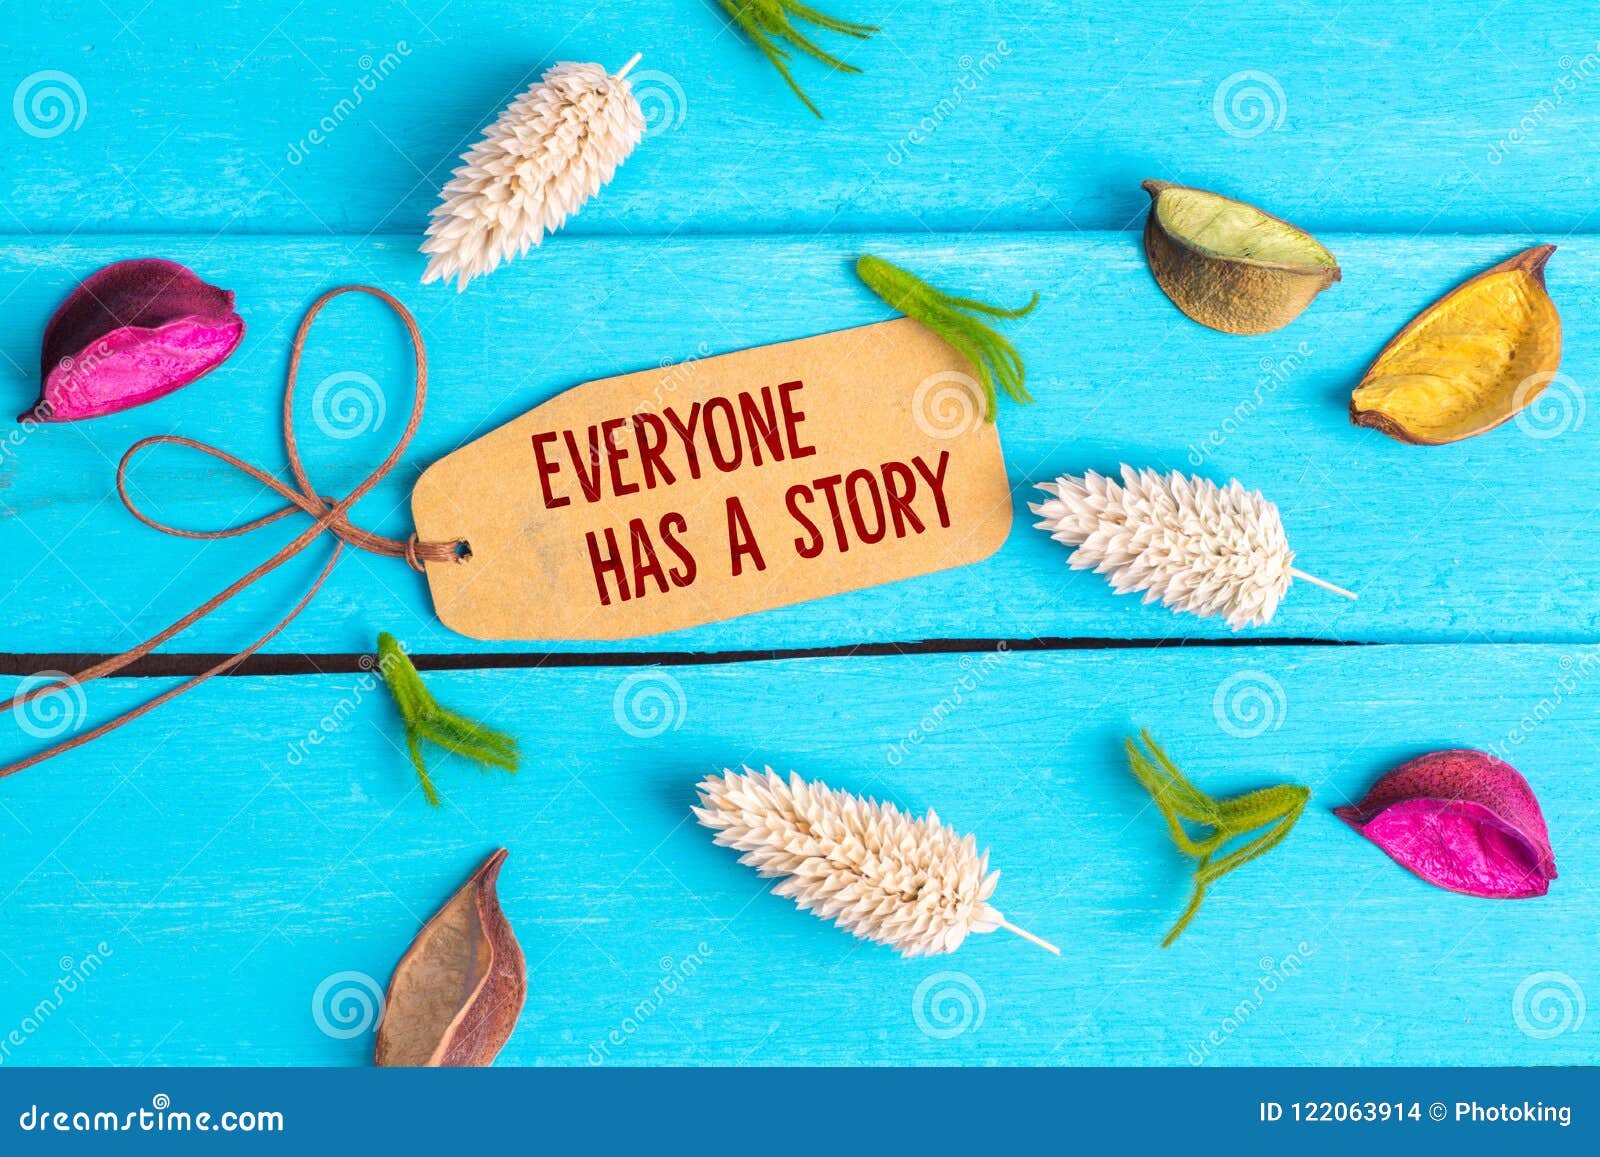 everyone has a story text on paper tag